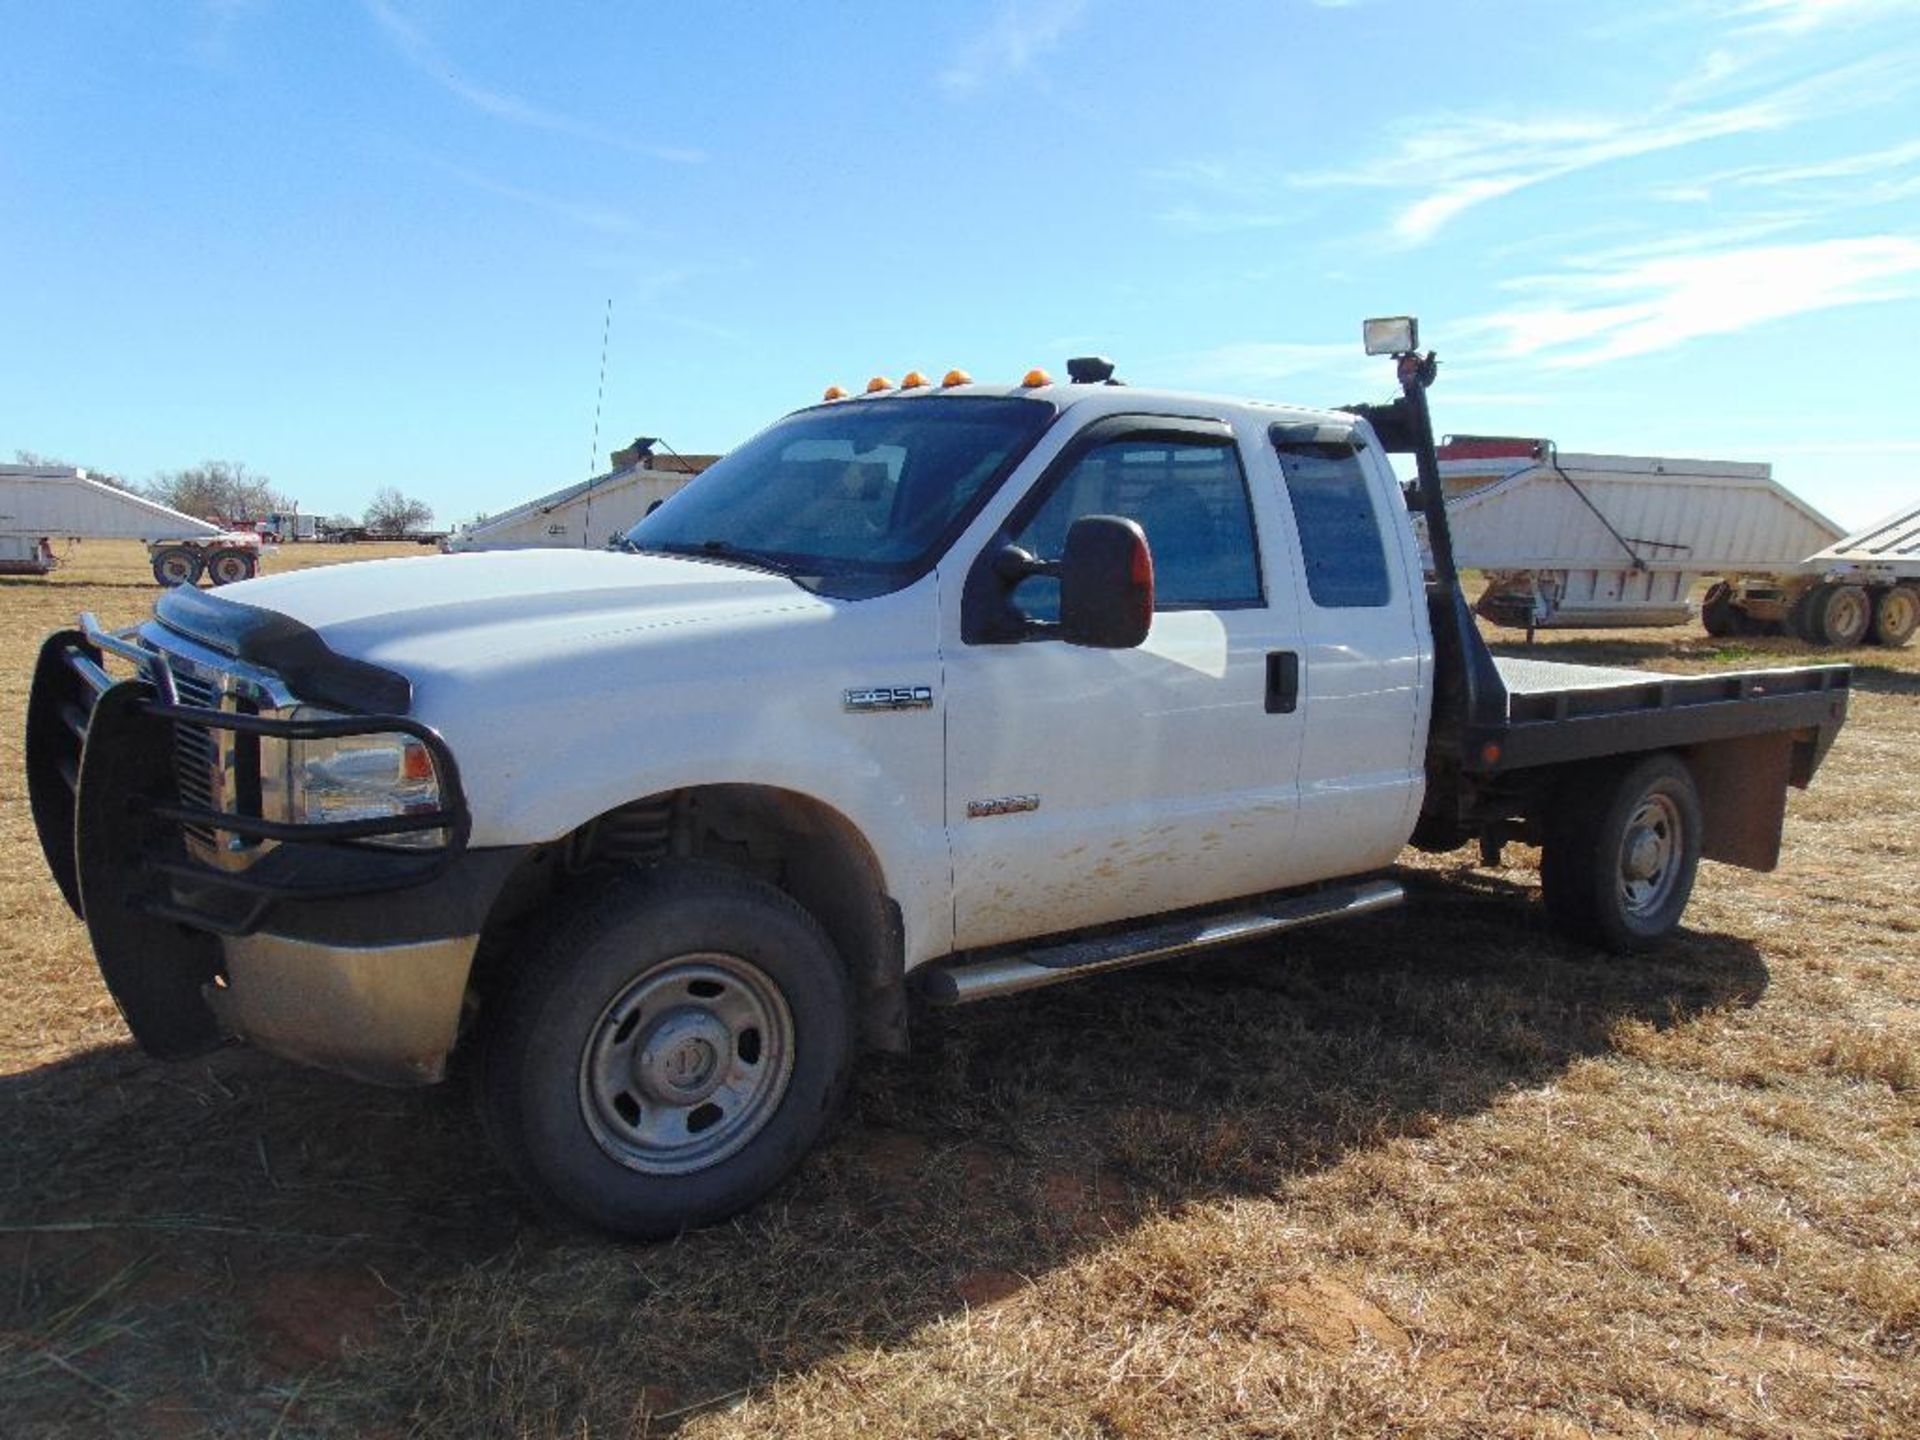 2007 Ford F350 4x4 Ext Cab Flatbed Pickup, s/n 1fdsx35p27eb36036, powerstroke eng, auto trans, od - Image 3 of 10